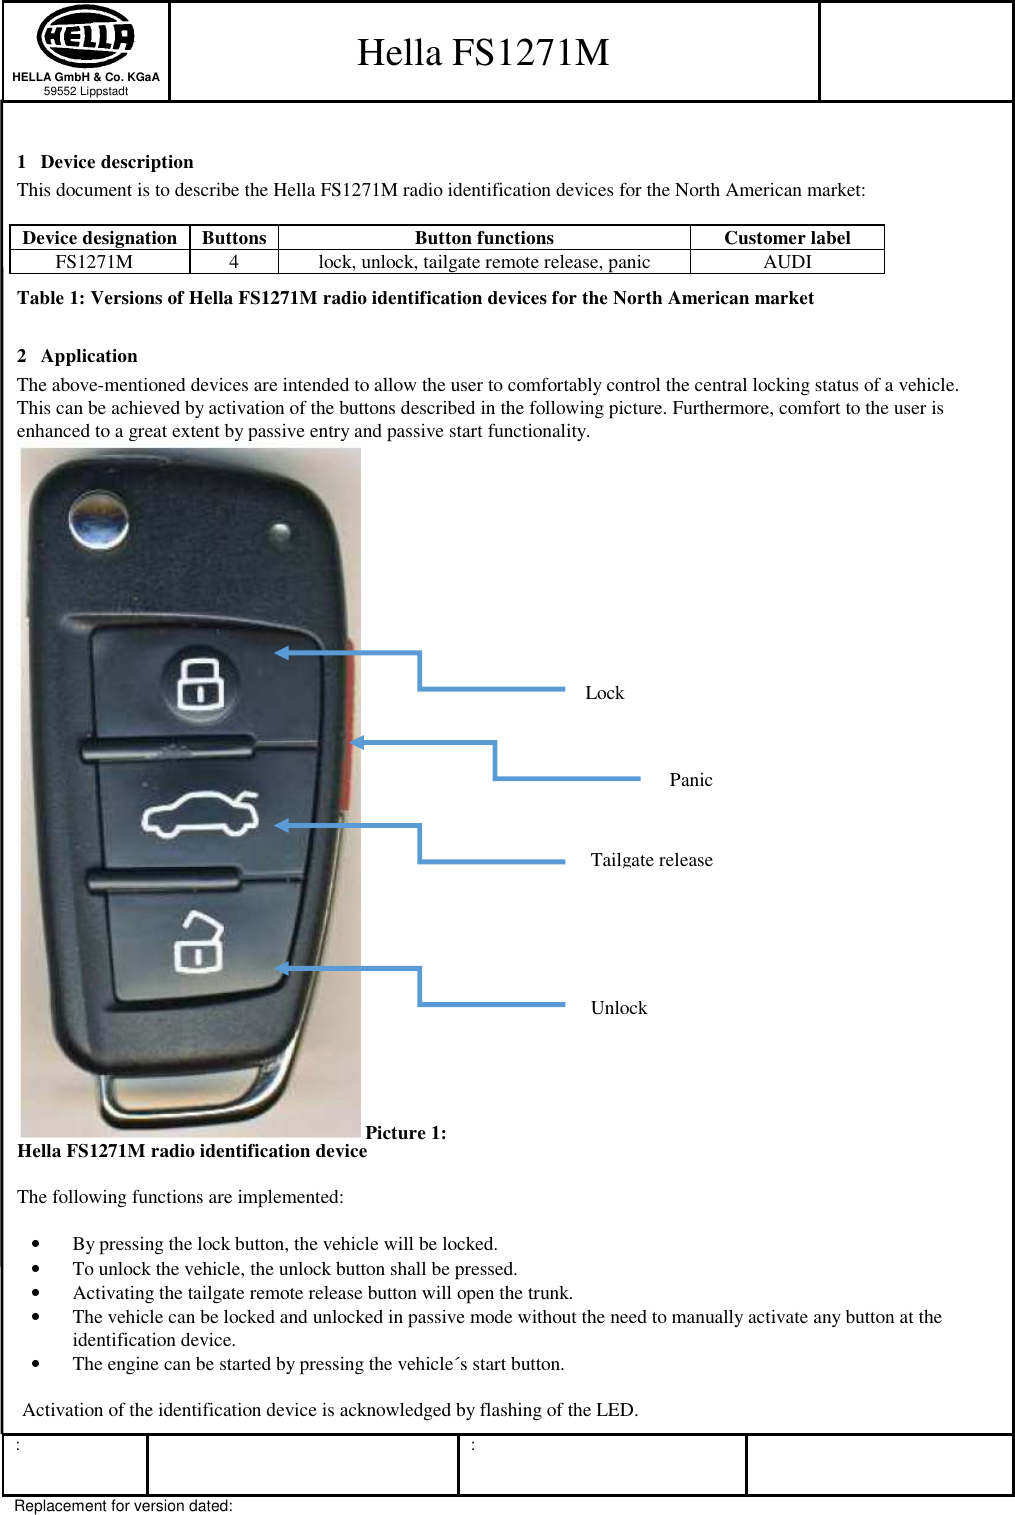  HELLA GmbH &amp; Co. KGaA 59552 Lippstadt   :      :  Replacement for version dated:  1 Device description 2 Application The above-mentioned devices are intended to allow the user to comfortably control the central locking status of a vehicle.  This can be achieved by activation of the buttons described in the following picture. Furthermore, comfort to the user is enhanced to a great extent by passive entry and passive start functionality.   The following functions are implemented:  • By pressing the lock button, the vehicle will be locked. • To unlock the vehicle, the unlock button shall be pressed. • Activating the tailgate remote release button will open the trunk. • The vehicle can be locked and unlocked in passive mode without the need to manually activate any button at the identification device. • The engine can be started by pressing the vehicle´s start button.   Activation of the identification device is acknowledged by flashing of the LED. Lock Panic Tailgate release Unlock  Picture 1: Hella FS1271M radio identification device Table 1: Versions of Hella FS1271M radio identification devices for the North American market Device designation  Buttons  Button functions  Customer label FS1271M  4  lock, unlock, tailgate remote release, panic  AUDI This document is to describe the Hella FS1271M radio identification devices for the North American market:  Hella FS1271M  